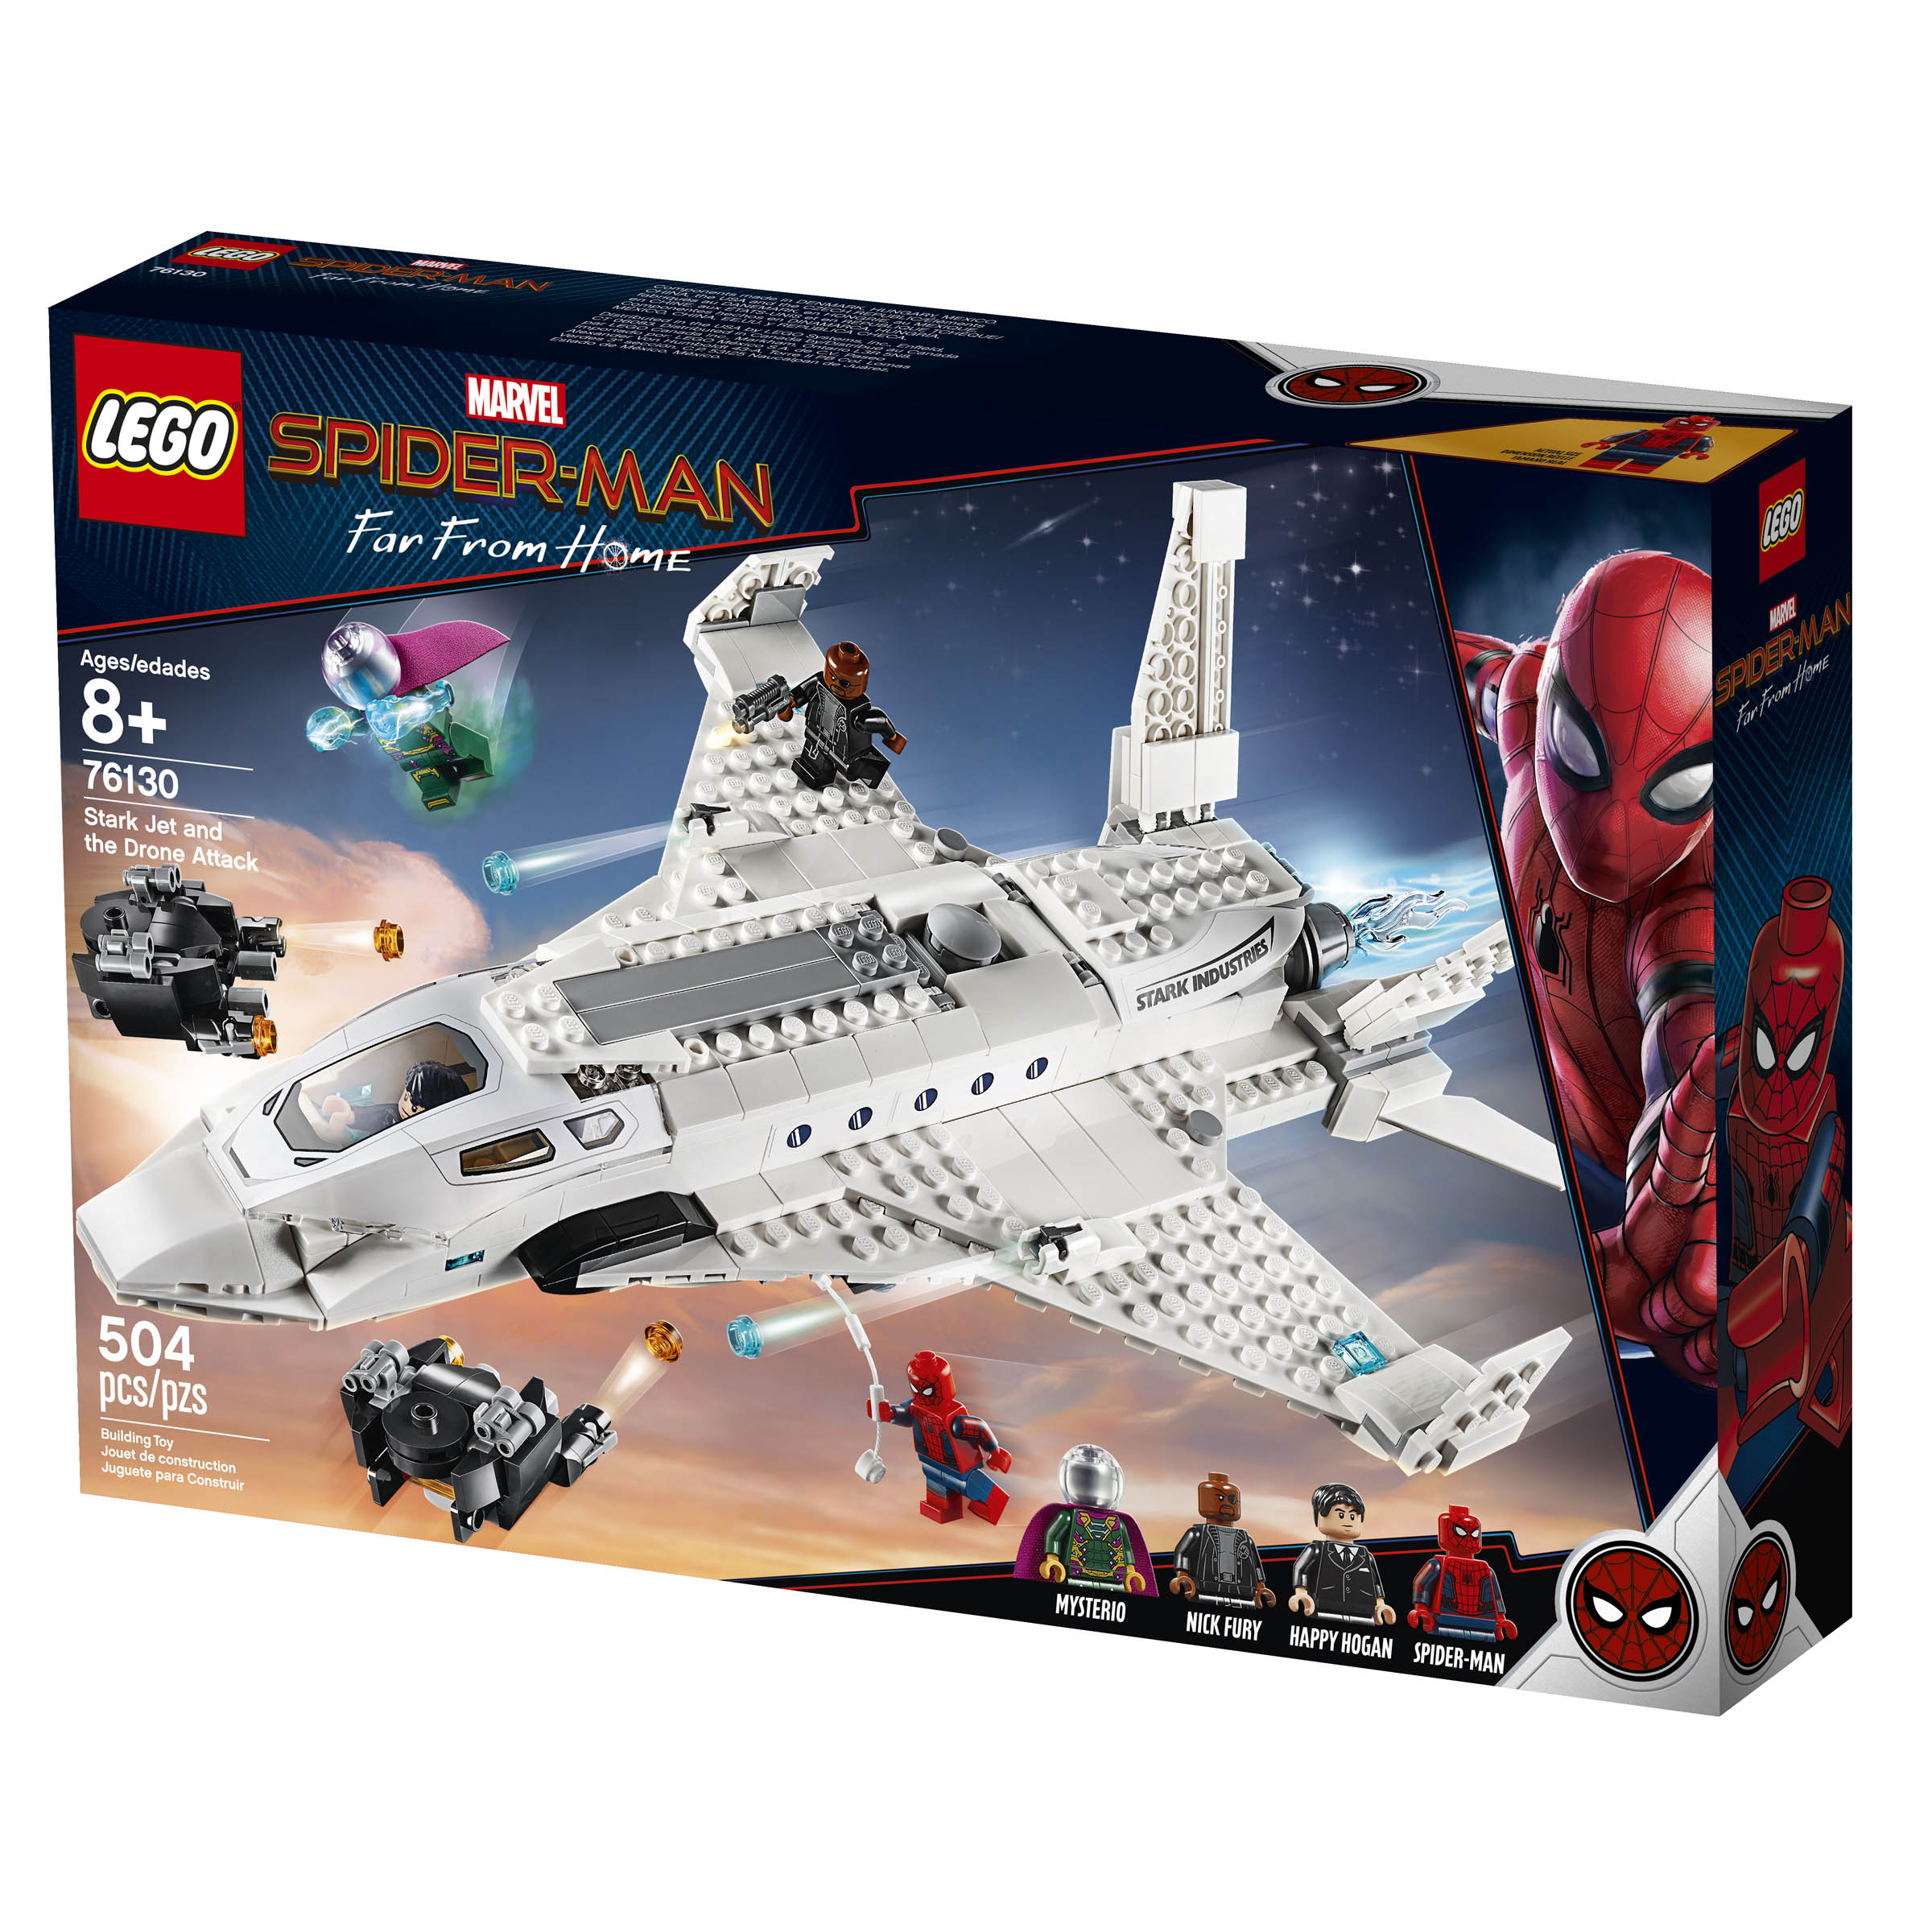 New Spider-Man: Far From Home LEGO Sets Revealed - FBTB